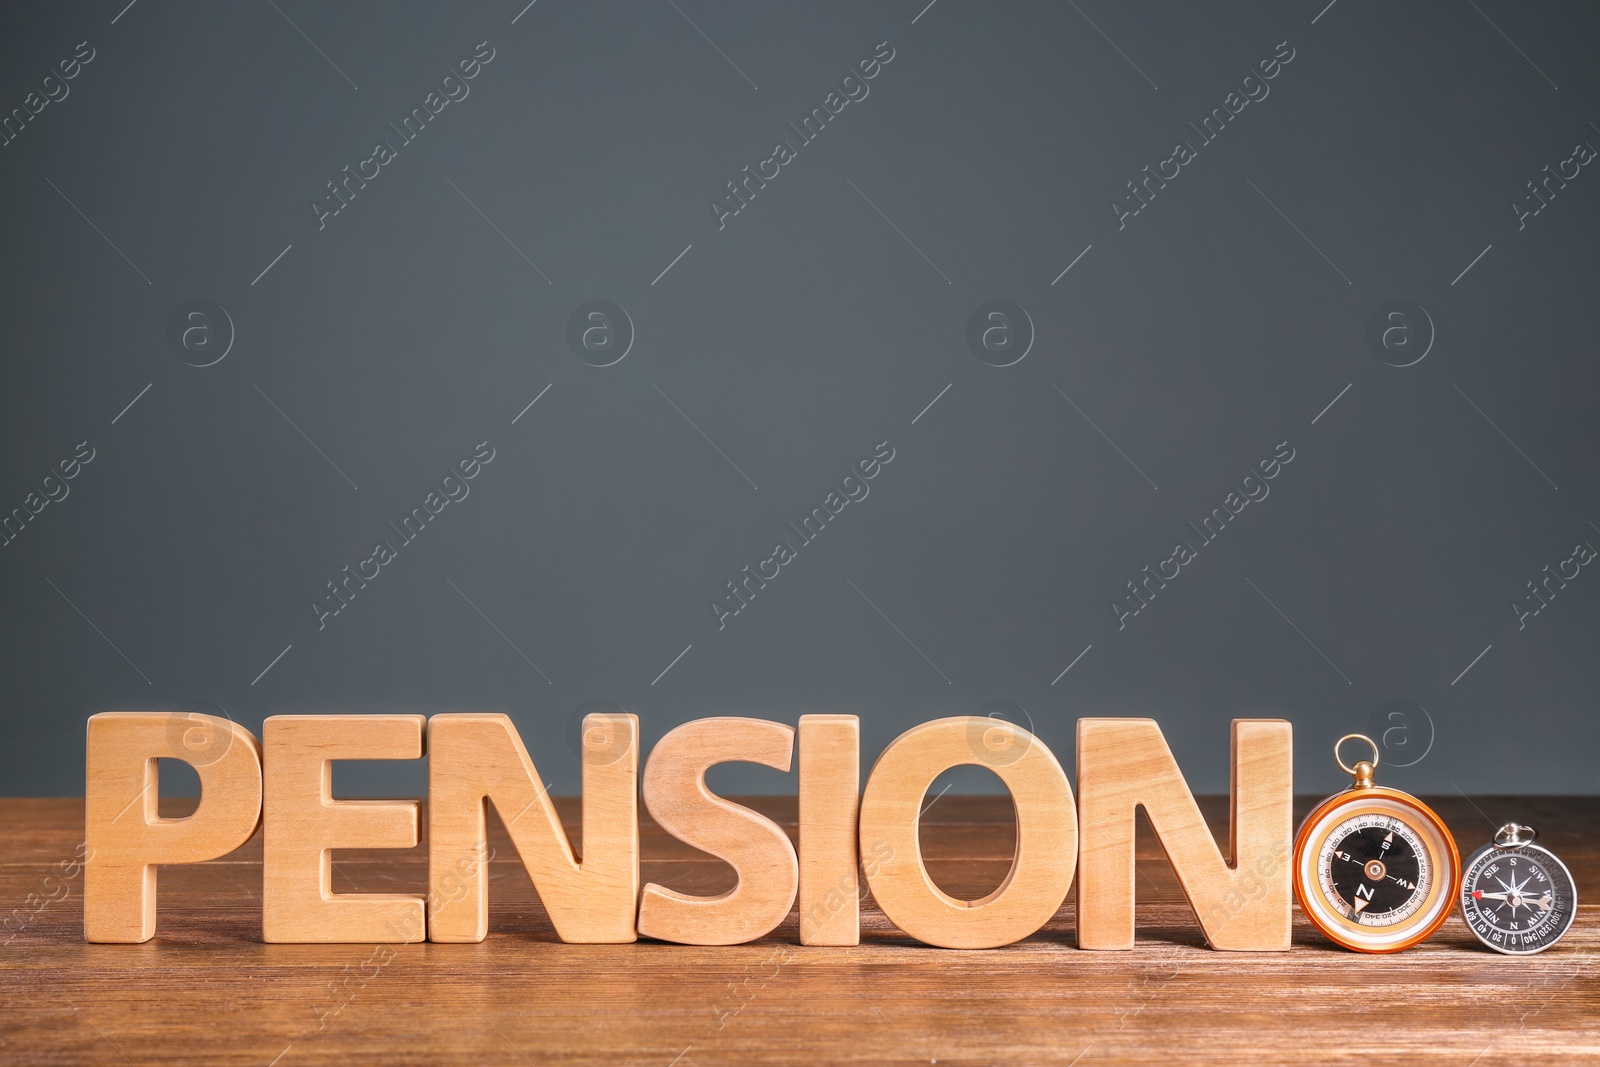 Photo of Word "PENSION" made of letters and compasses on wooden table